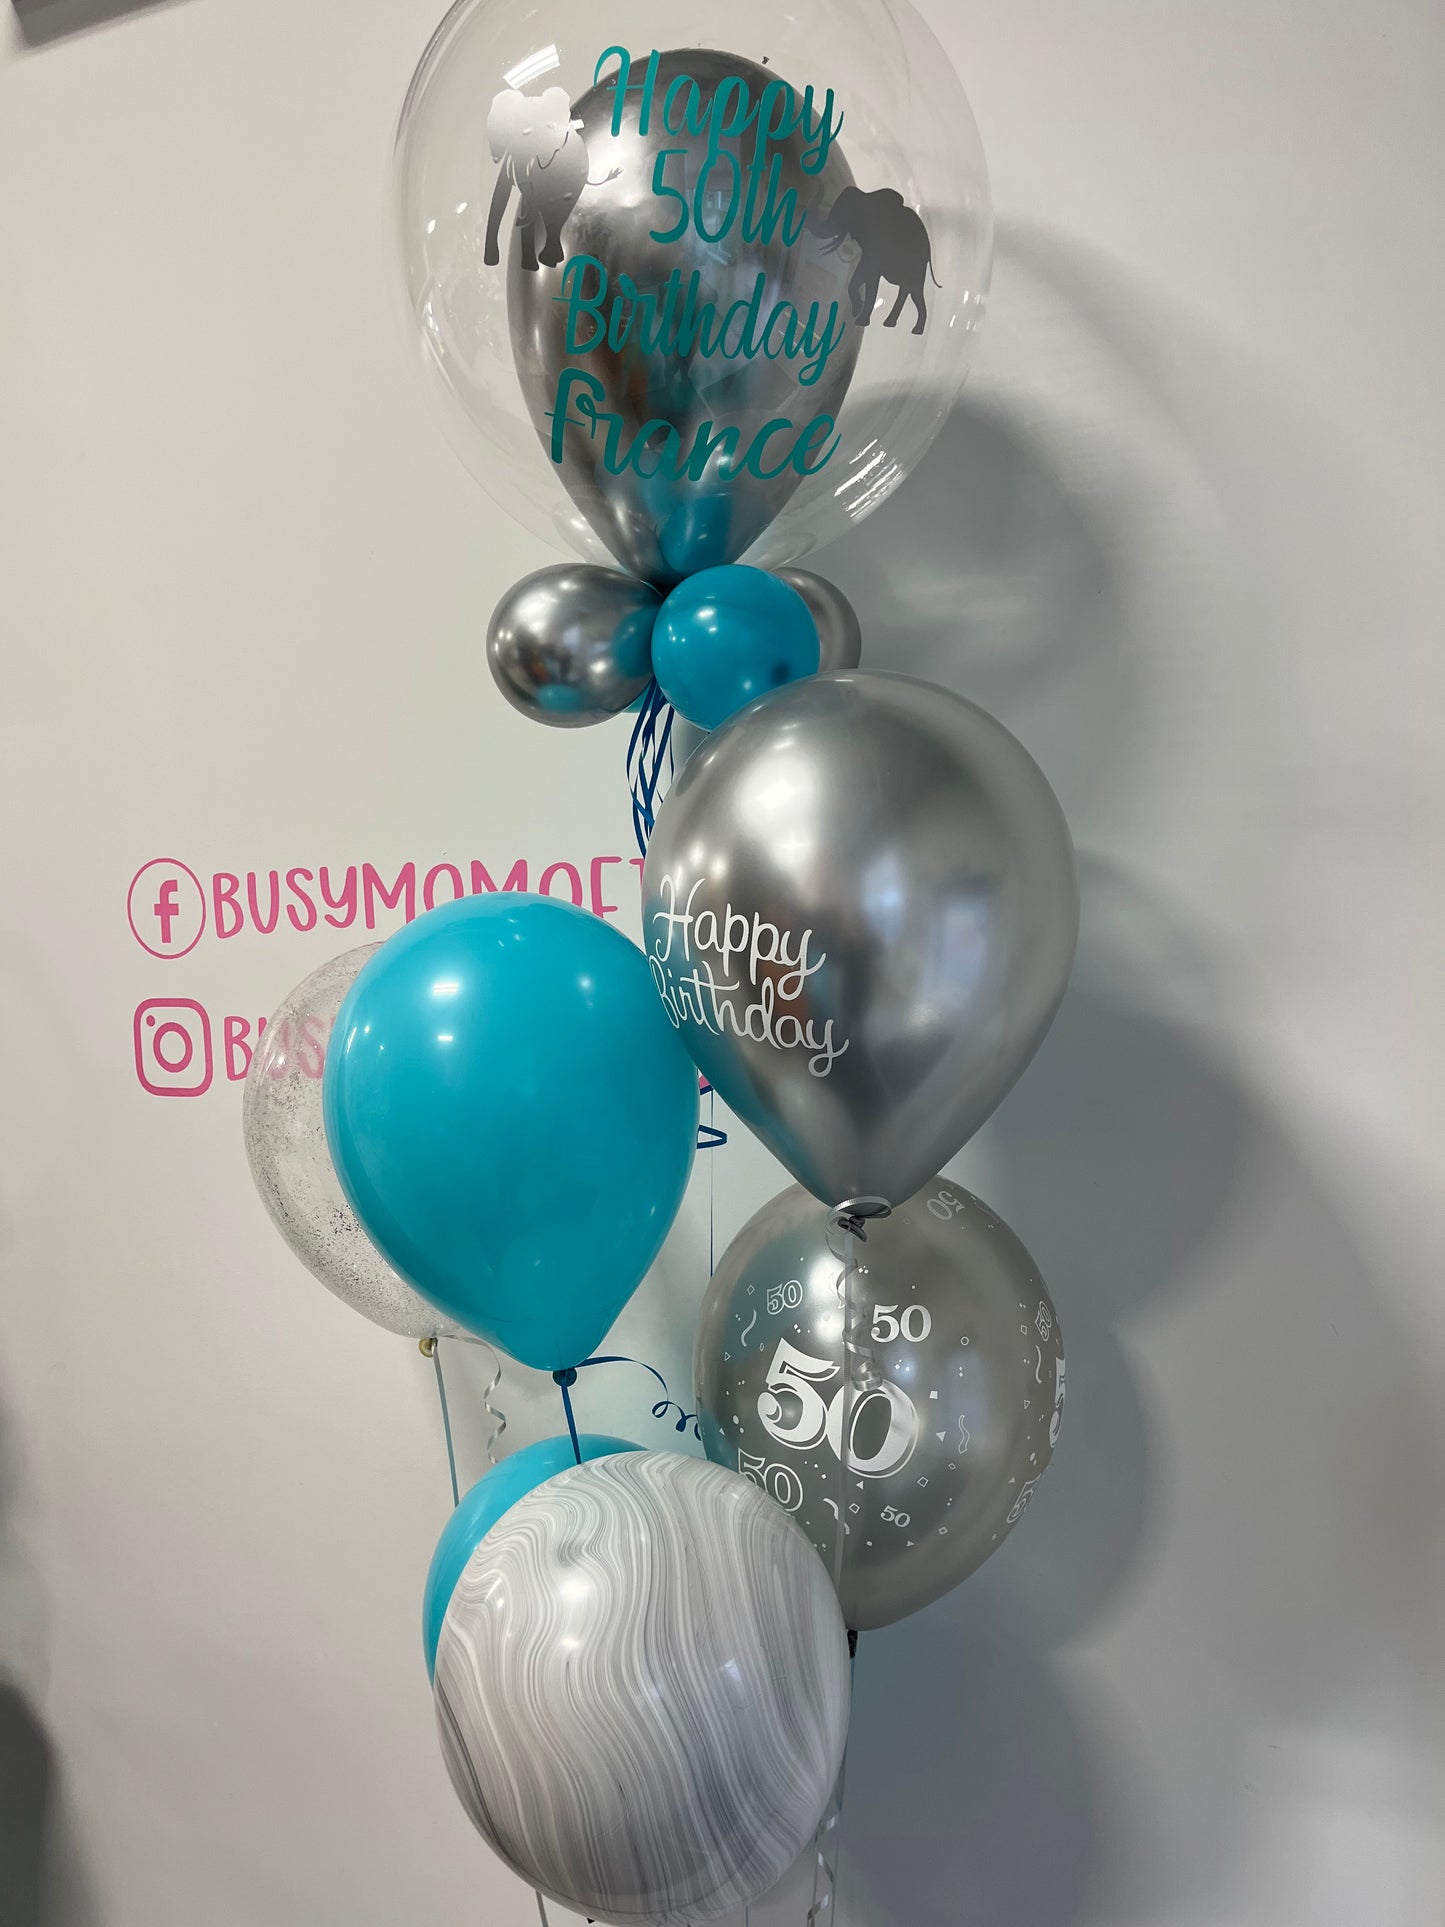 Balloons for a Special Occassion